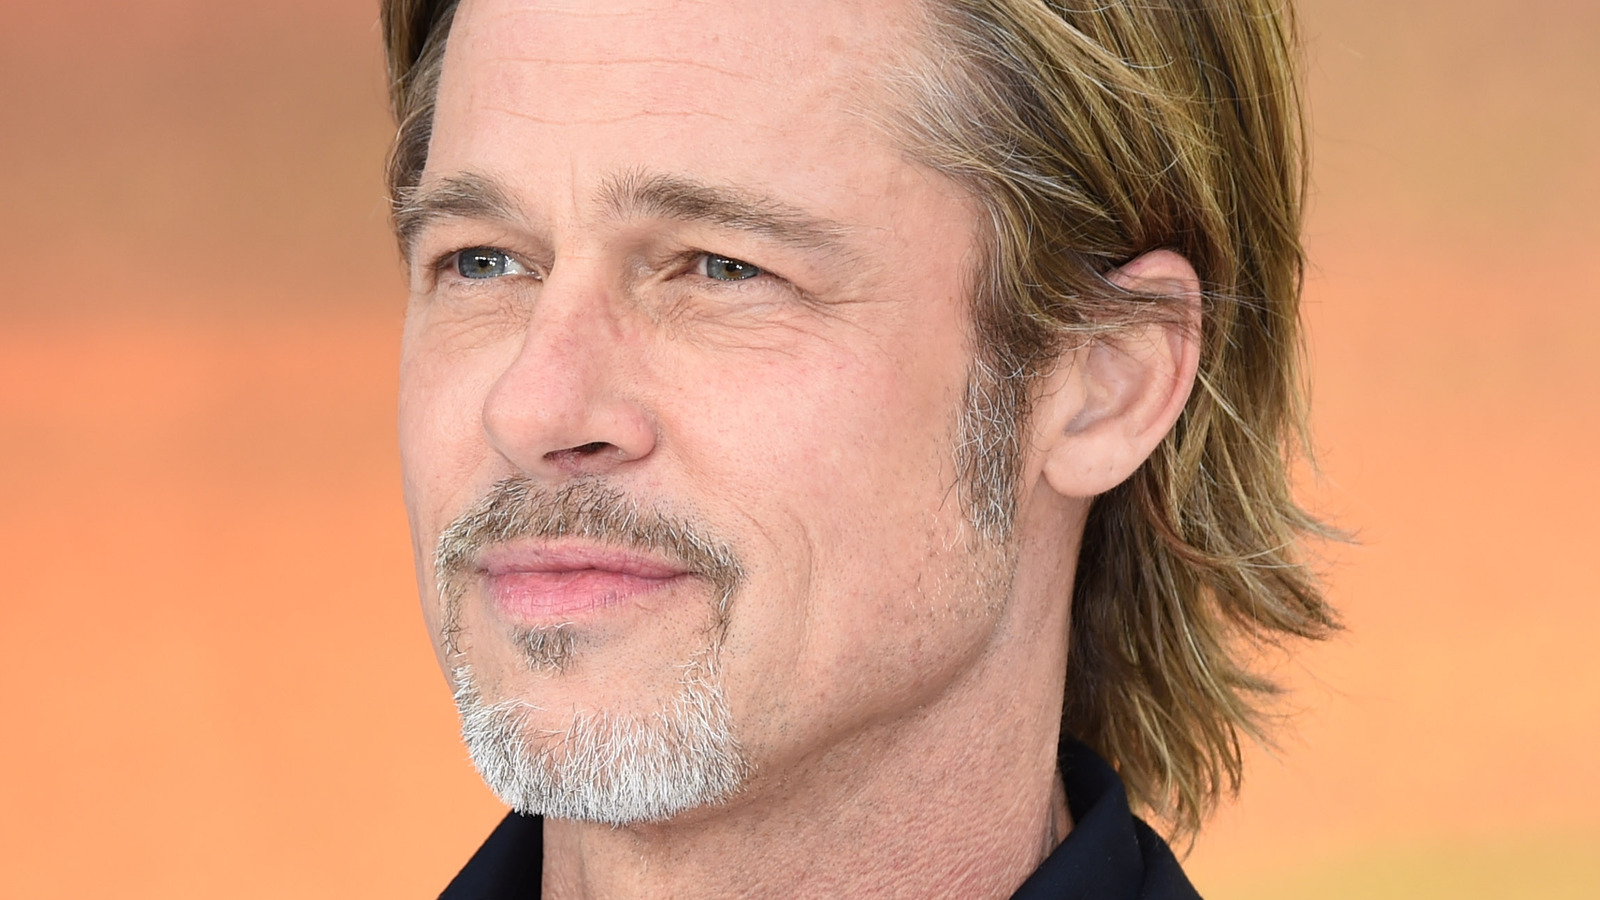 What Brad Pitt Did Before All The Fame